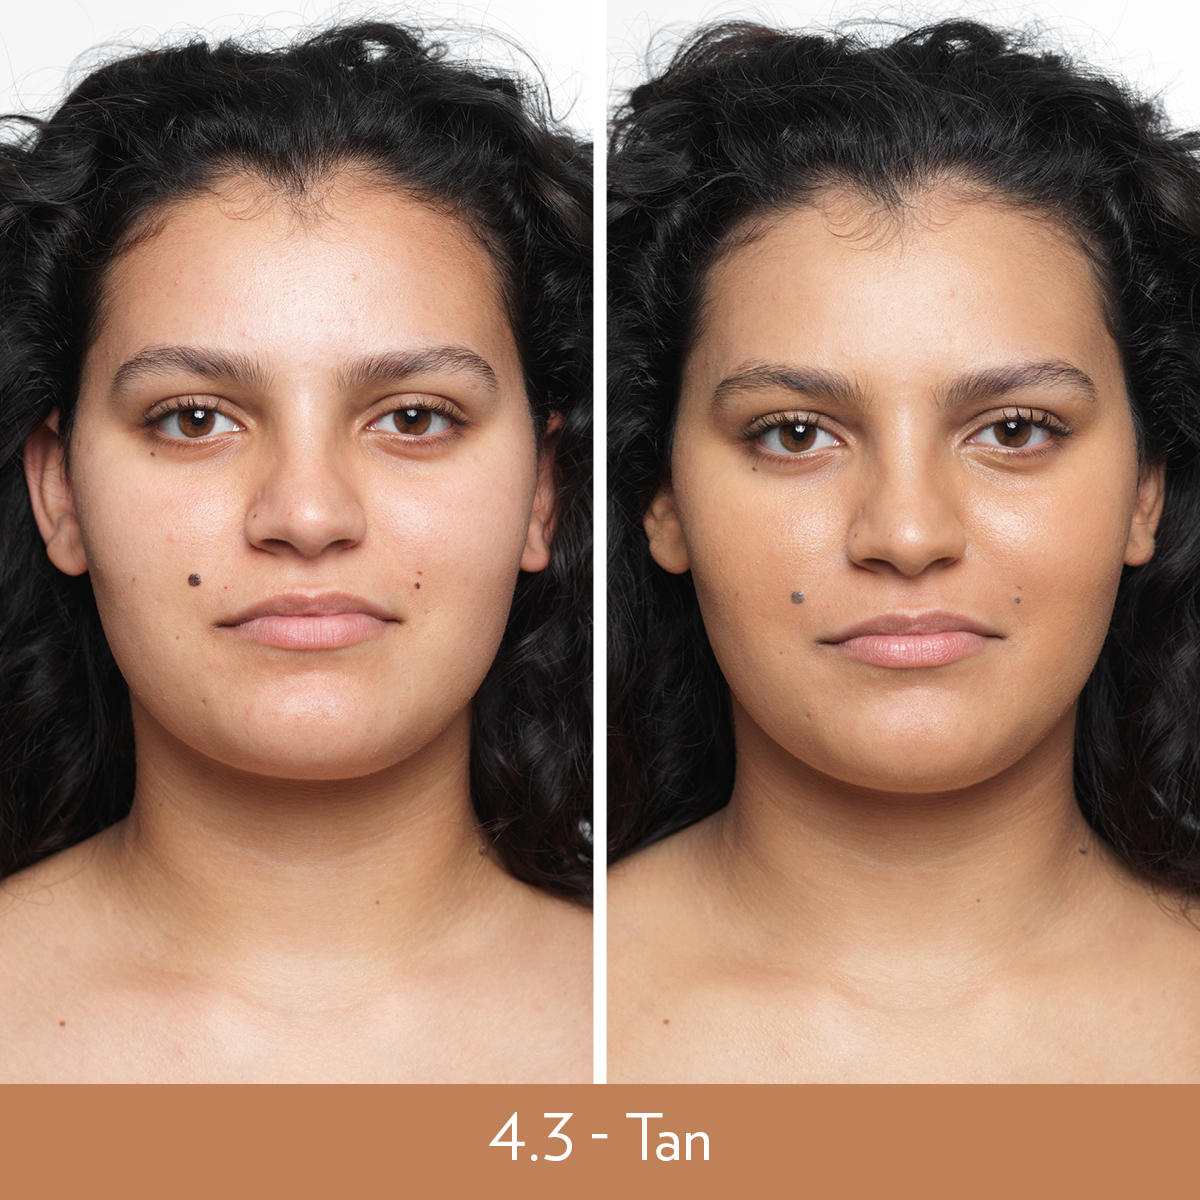 Nu Skin BB+ Skin Loving Foundation 4.3 Tan Before and After